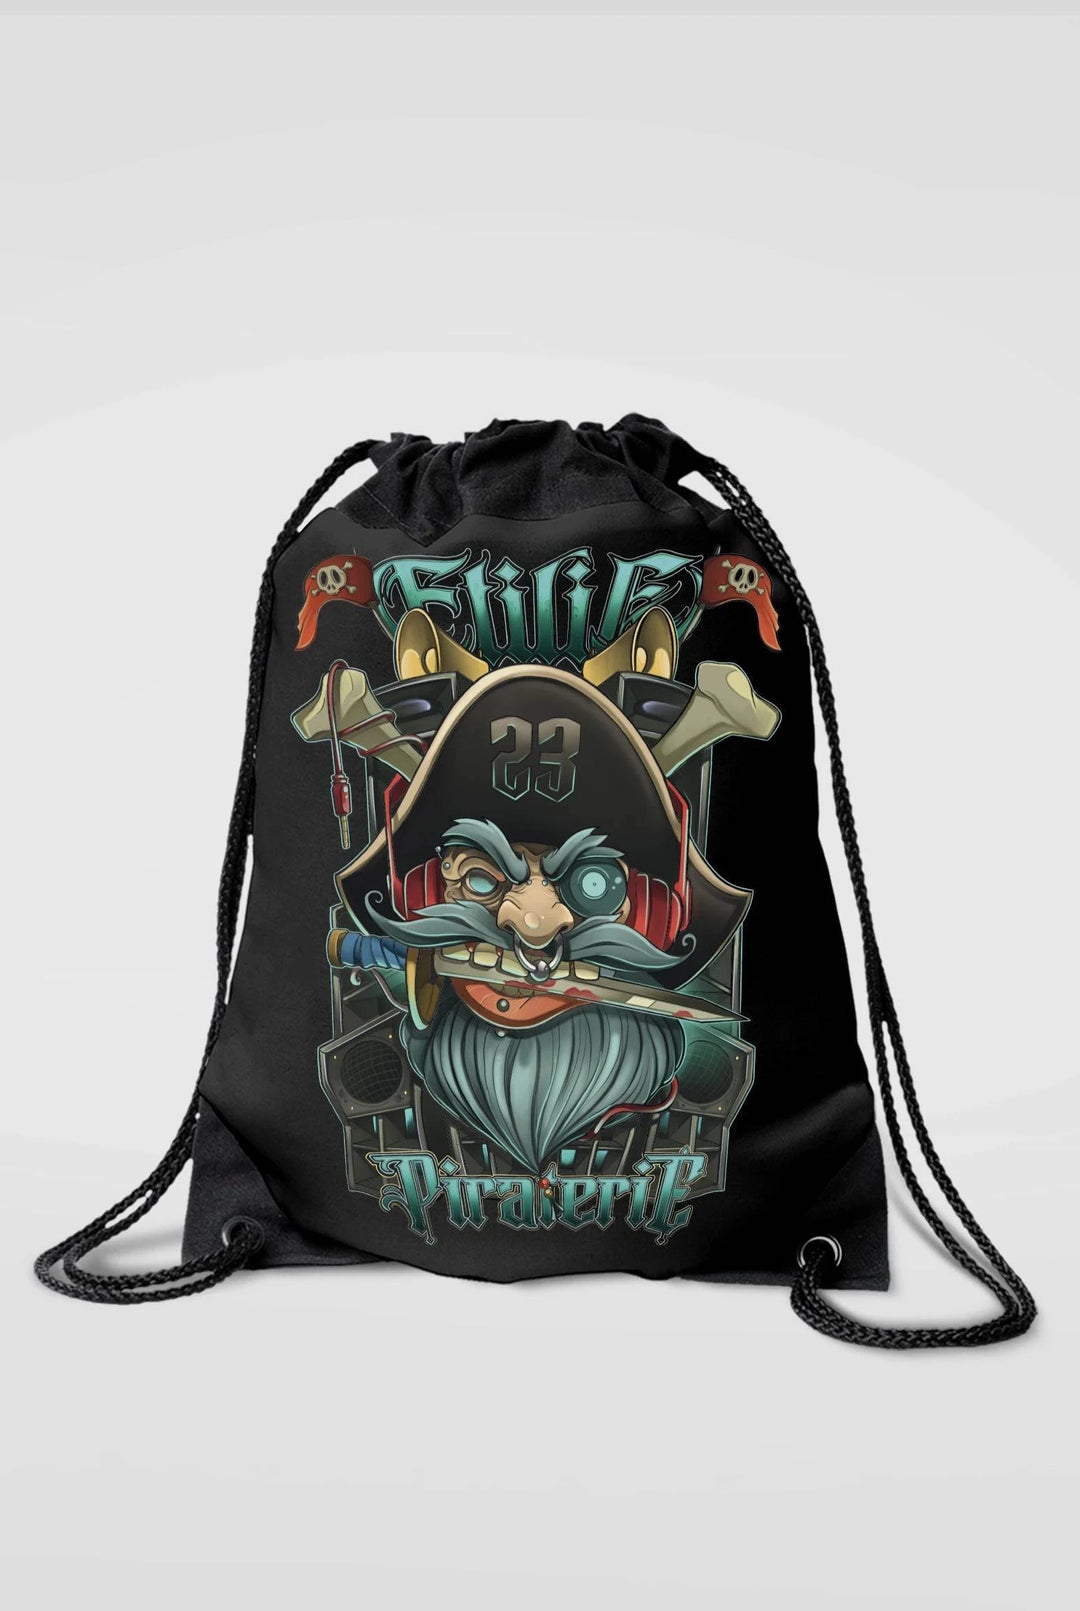 La Piraterie Backpack